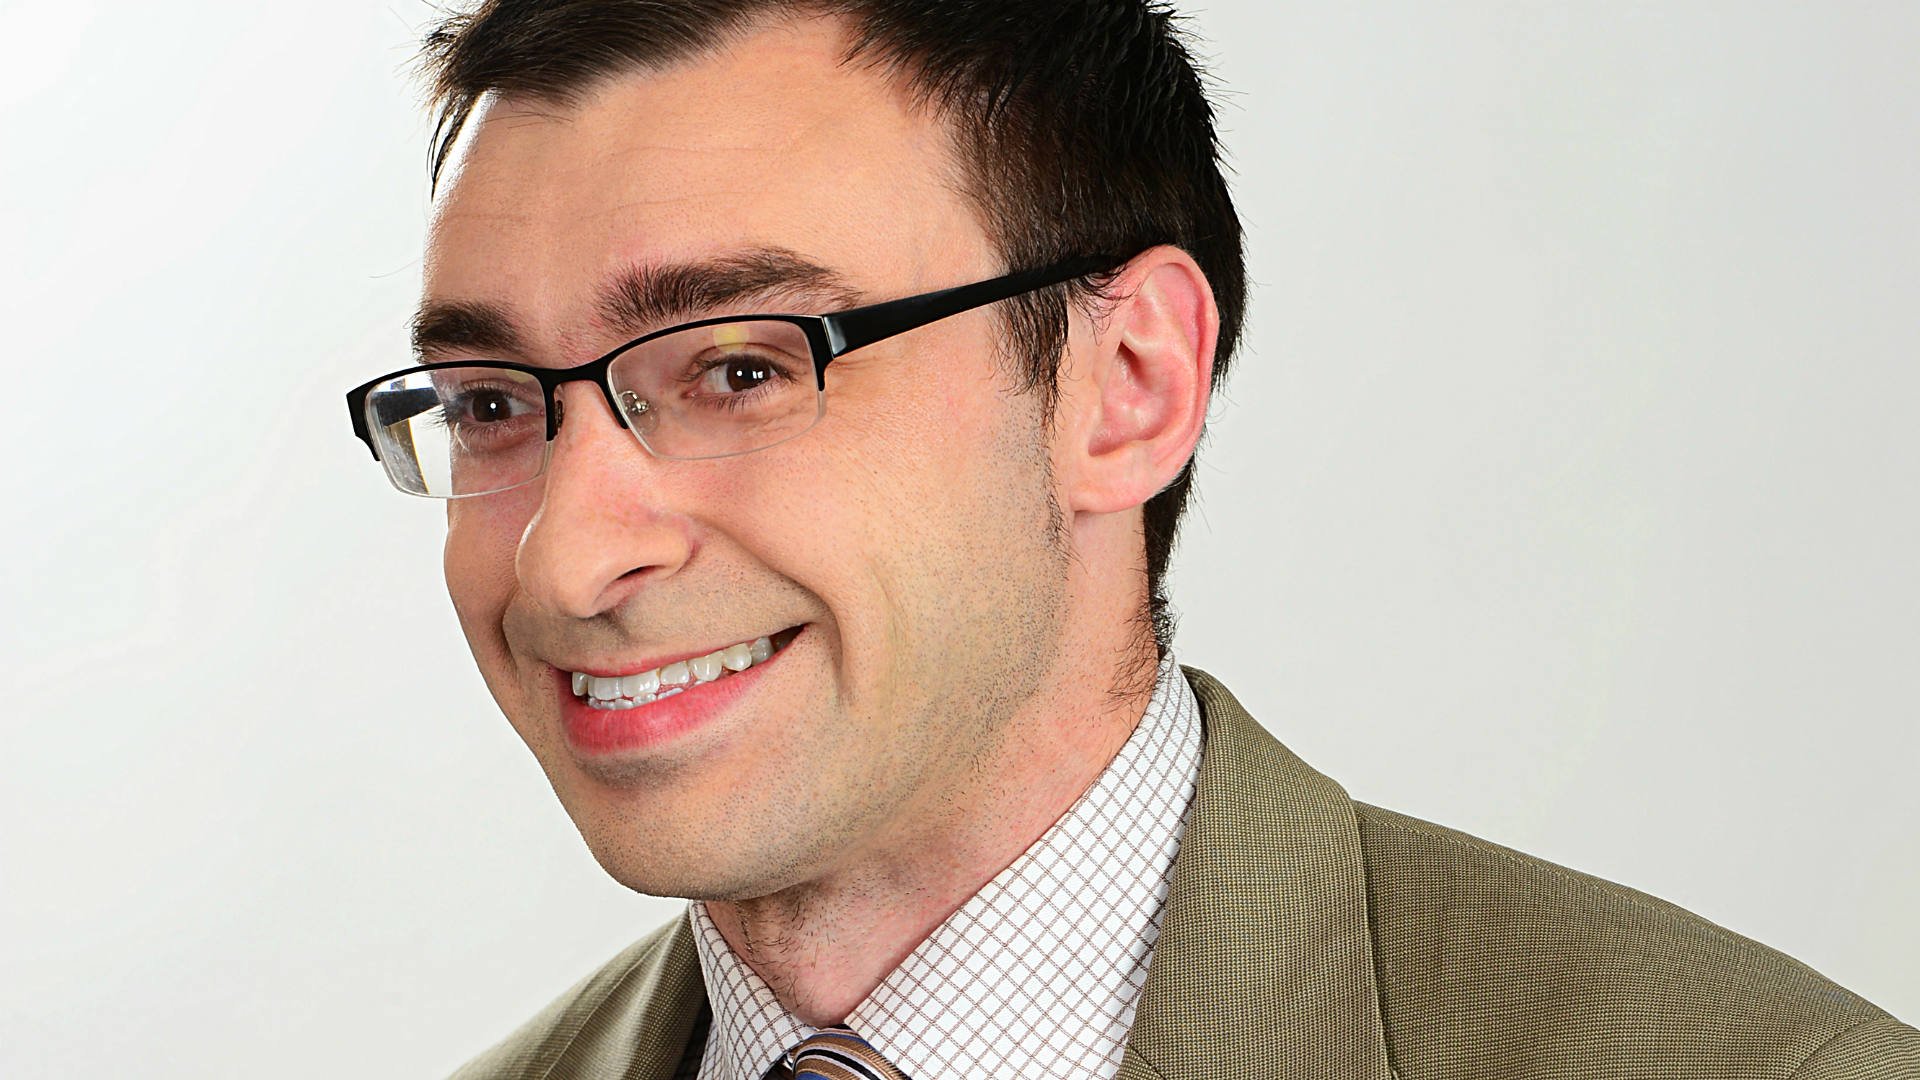 Sox Announcer Jason Benetti reflects on his first year in the booth